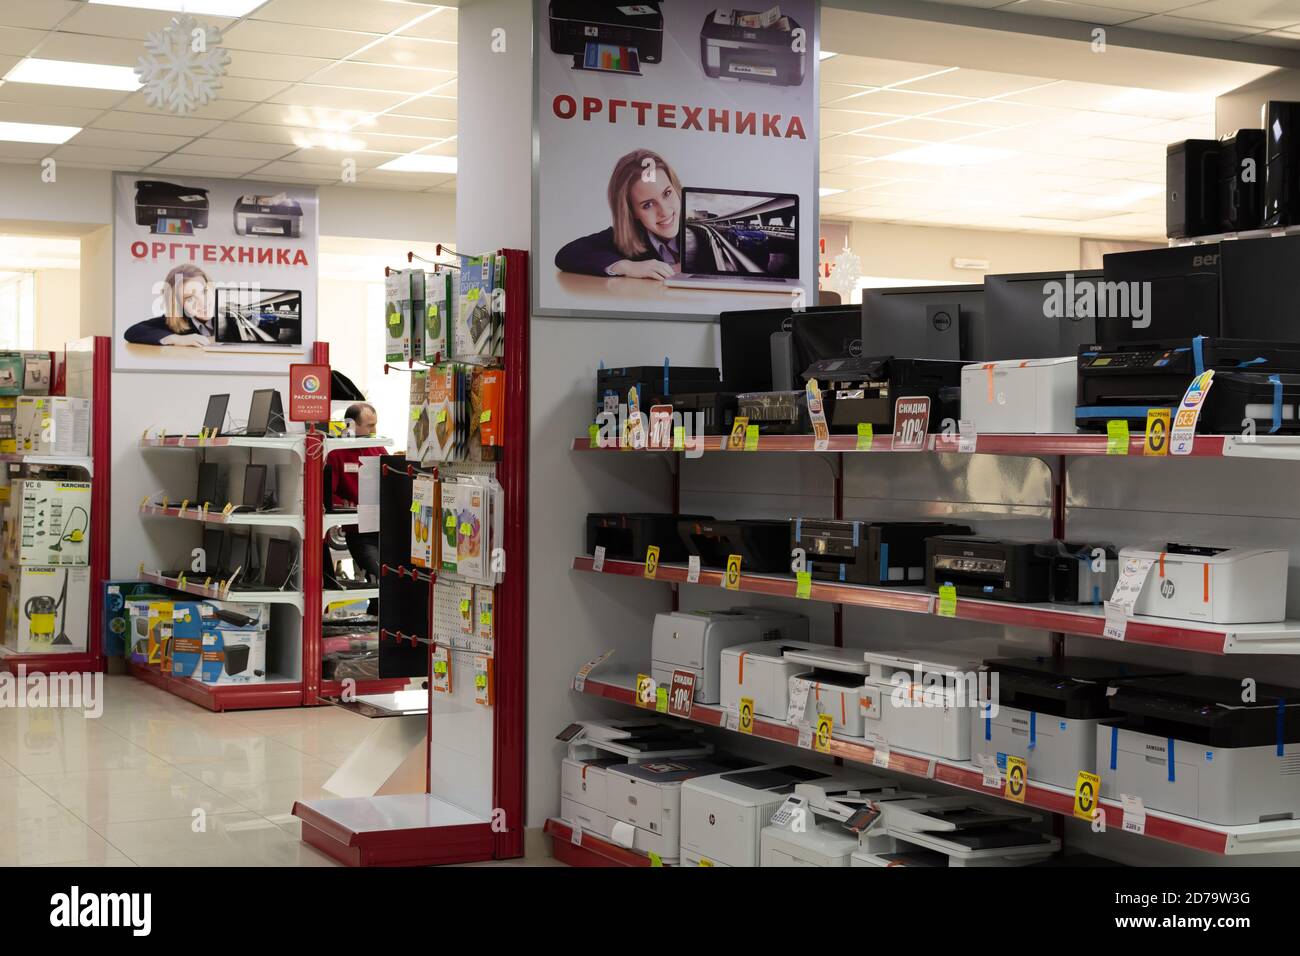 Tiraspol, Moldova - January 19, 2019: Hi-tech is the largest consumer retail chain in the unrecognized republic Transnistria. Printer and Scanners in Stock Photo